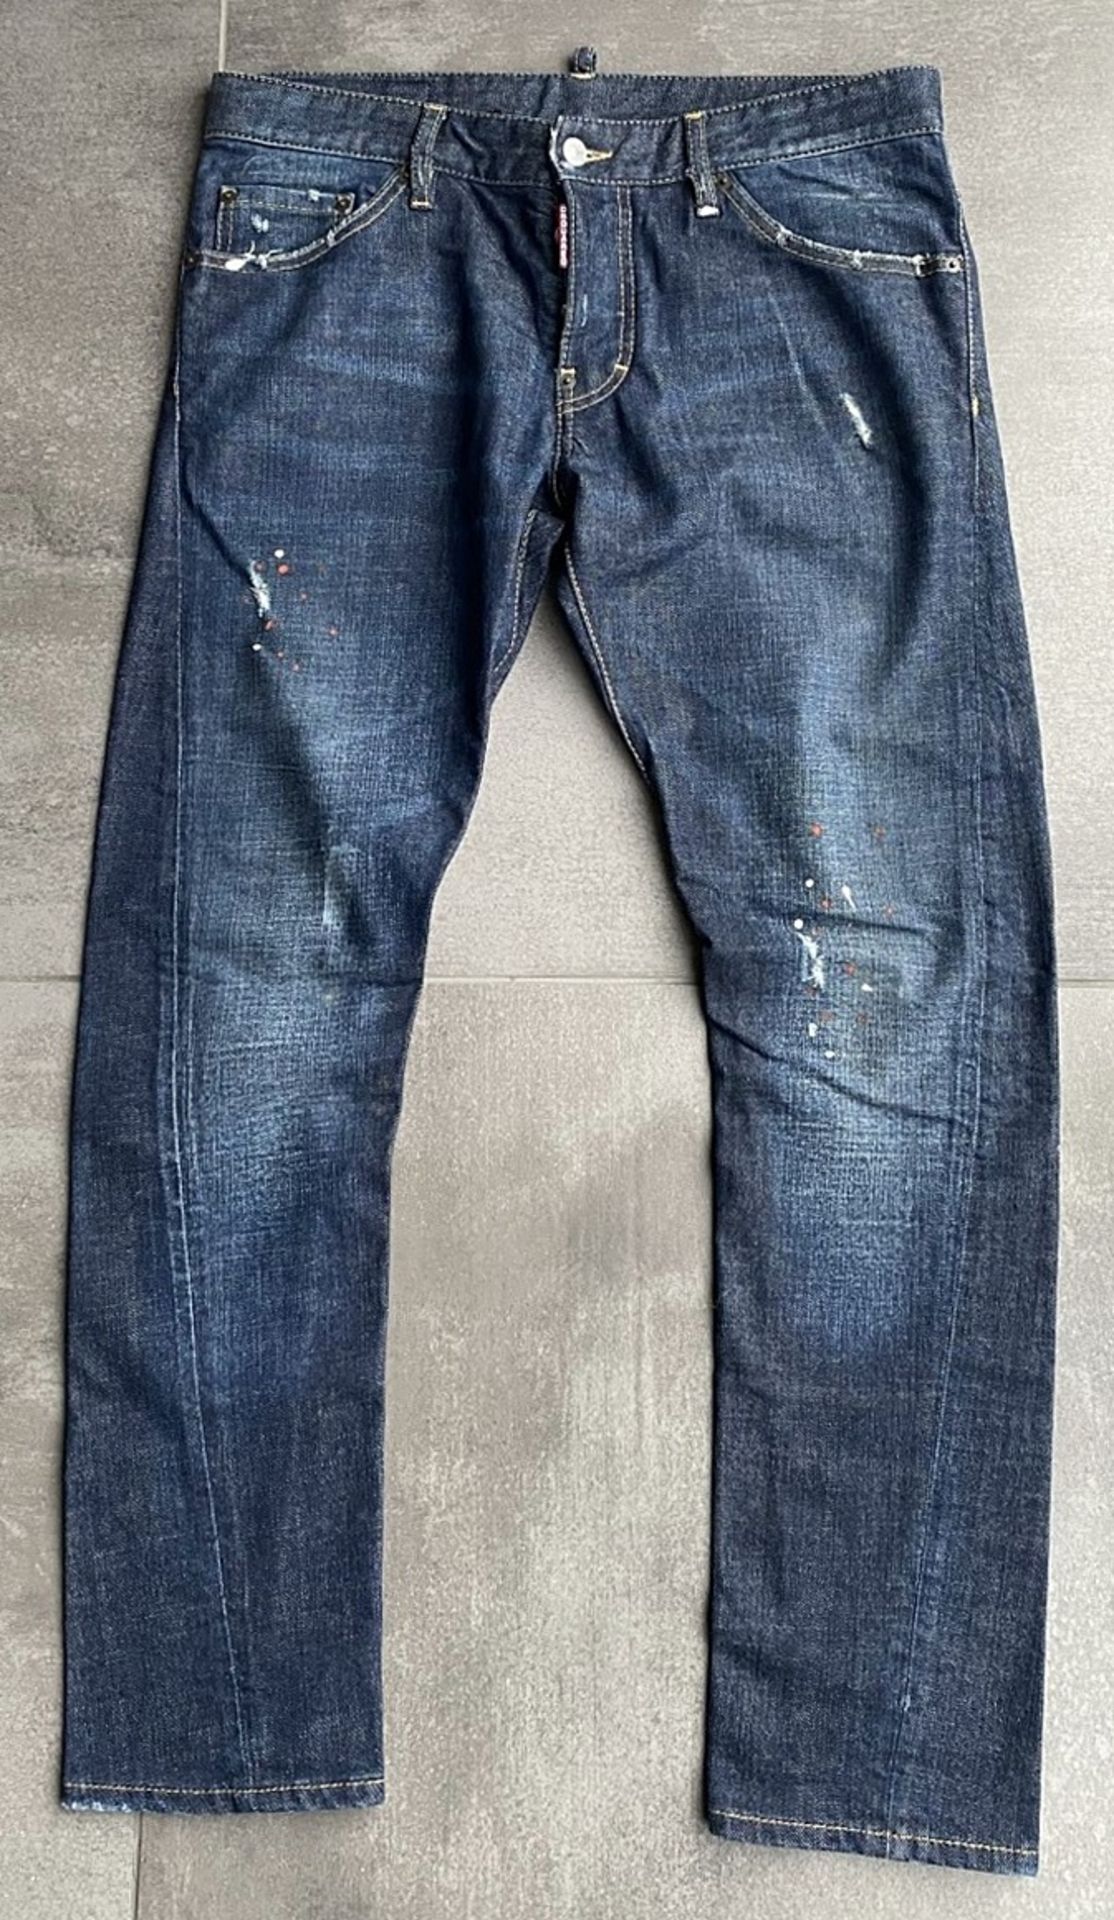 1 x Pair Of Men's Genuine Dsquared2 Jeans In Dark Blue - Size: 48 - Preowned In Very Good